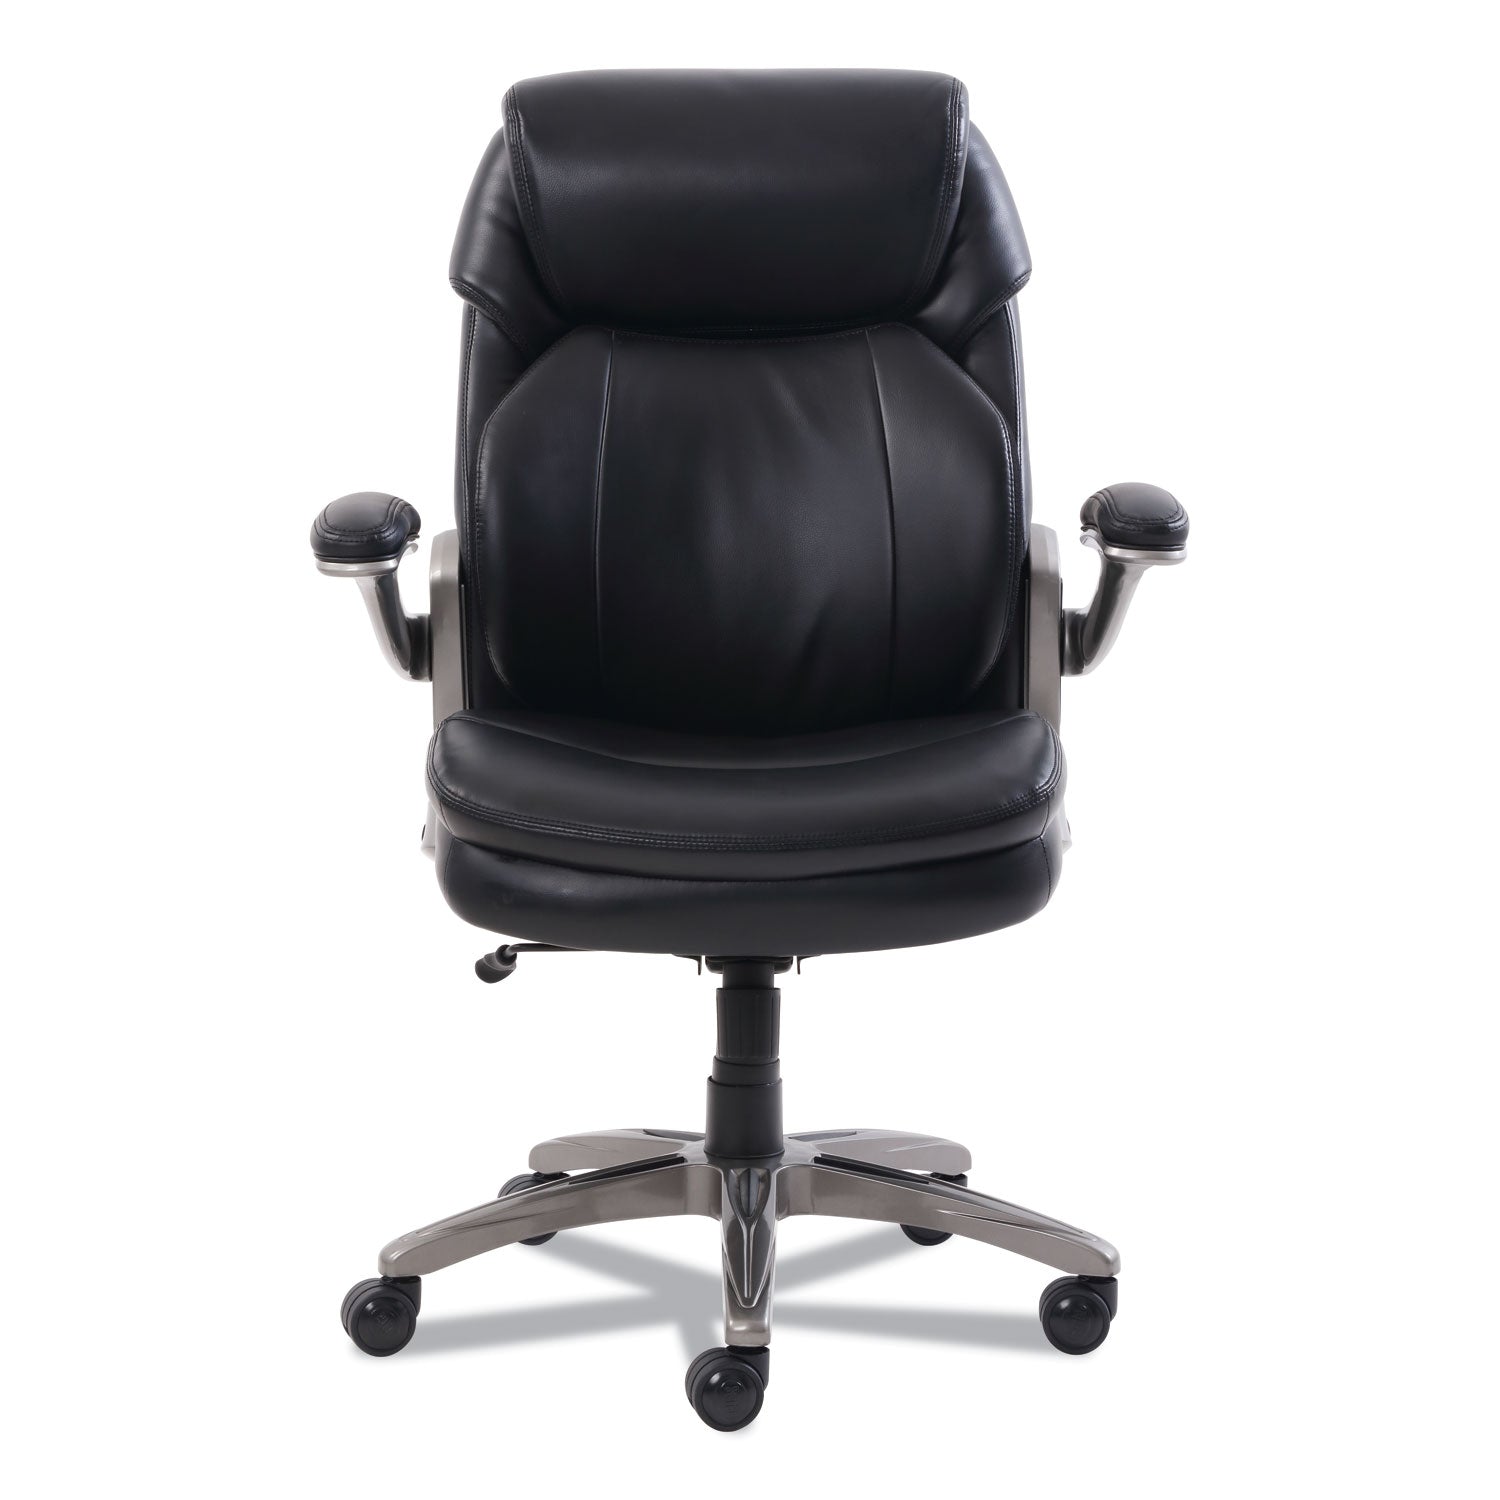 cosset-mid-back-executive-chair-supports-up-to-275-lb-185-to-215-seat-height-black-seat-back-slate-base_srj48966 - 4